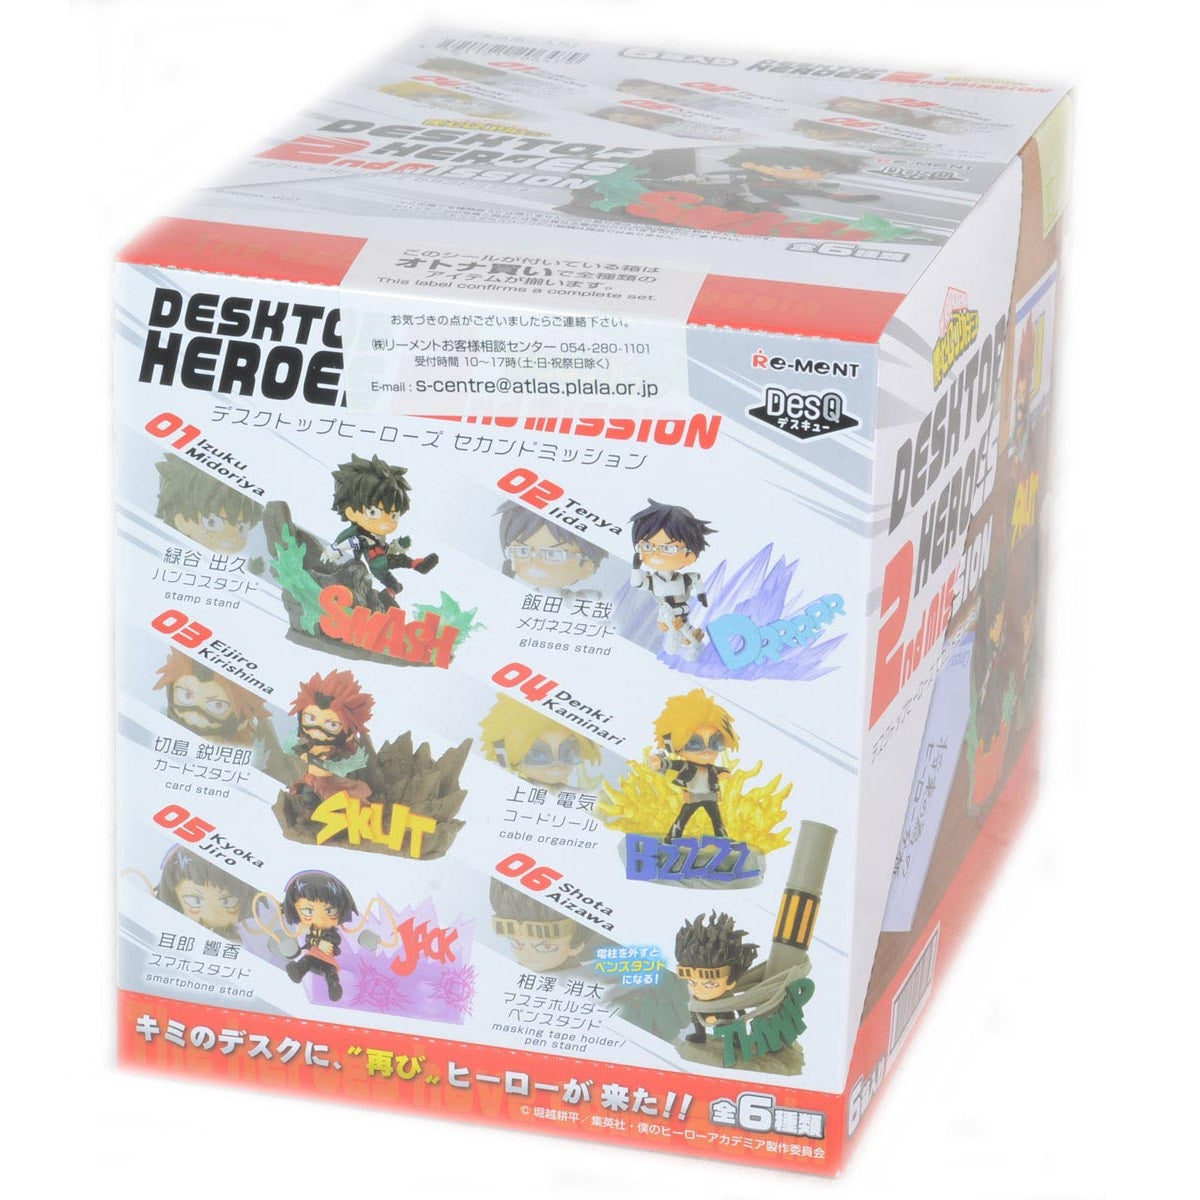 Re-Ment My Hero Academia DesQ Desktop Heroes 2nd Mission-Single Box (Random)-Re-Ment-Ace Cards & Collectibles